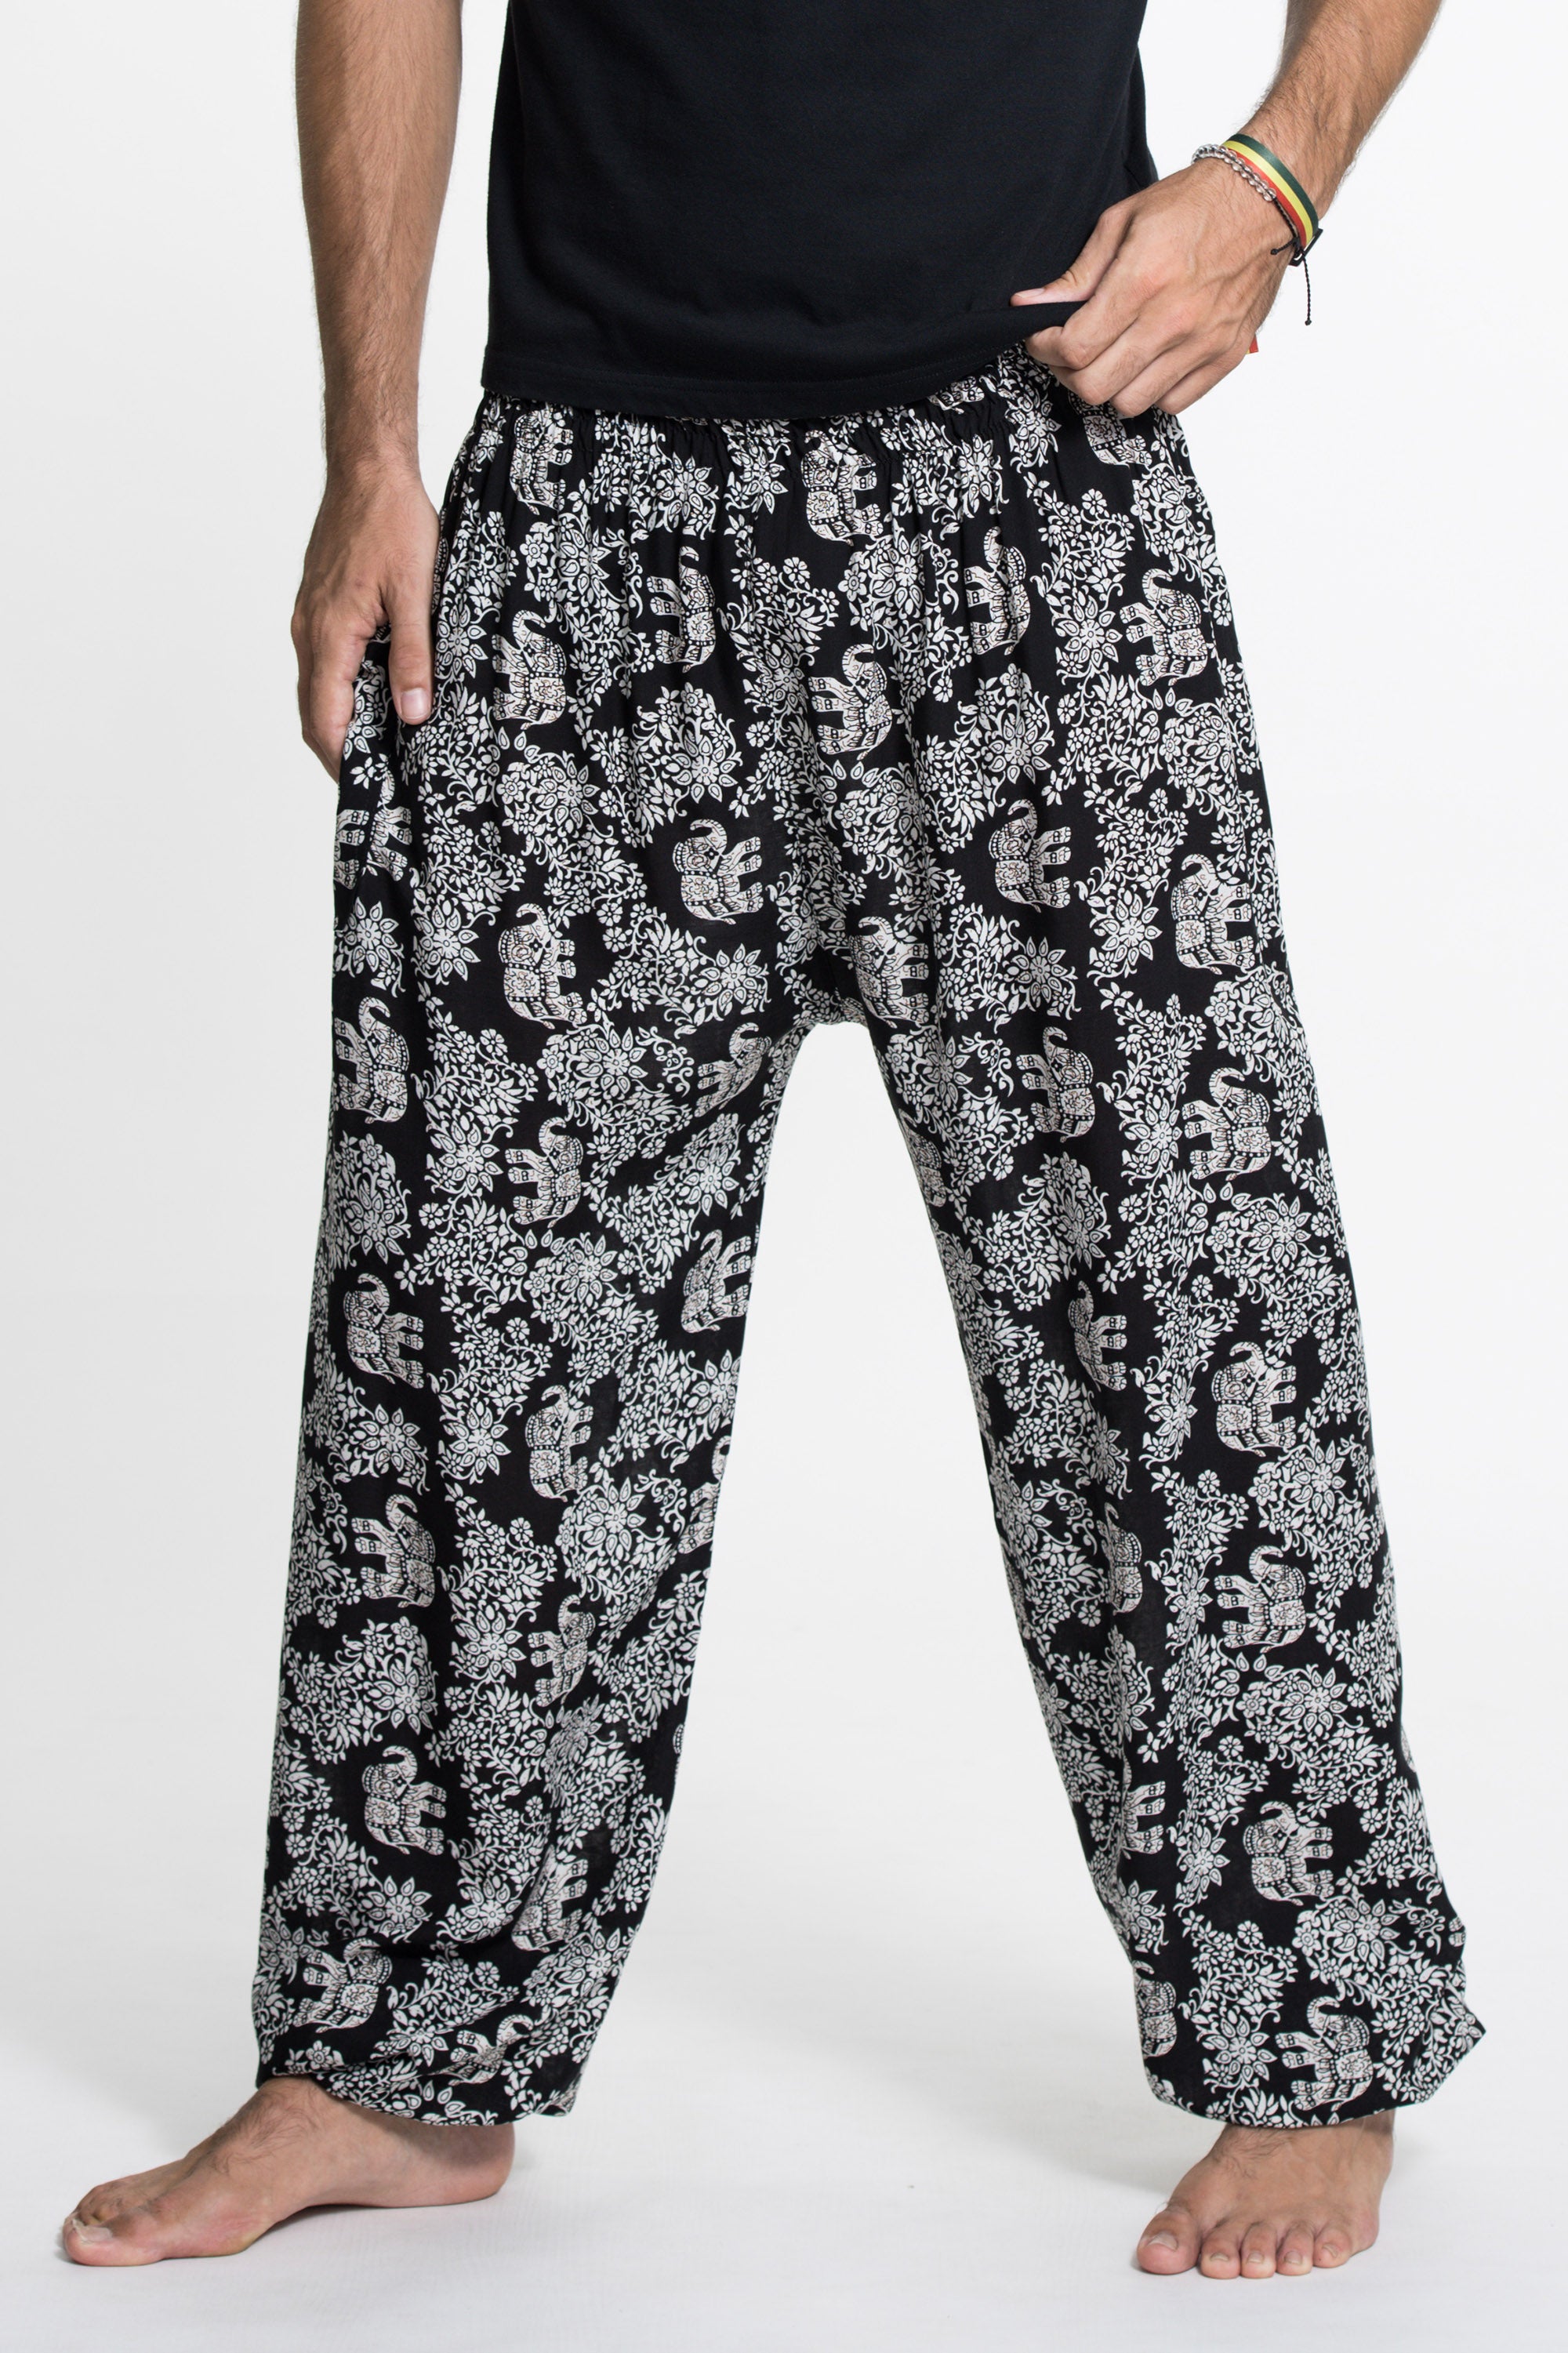 Blooming Elephant Tall Harem Pants in Black